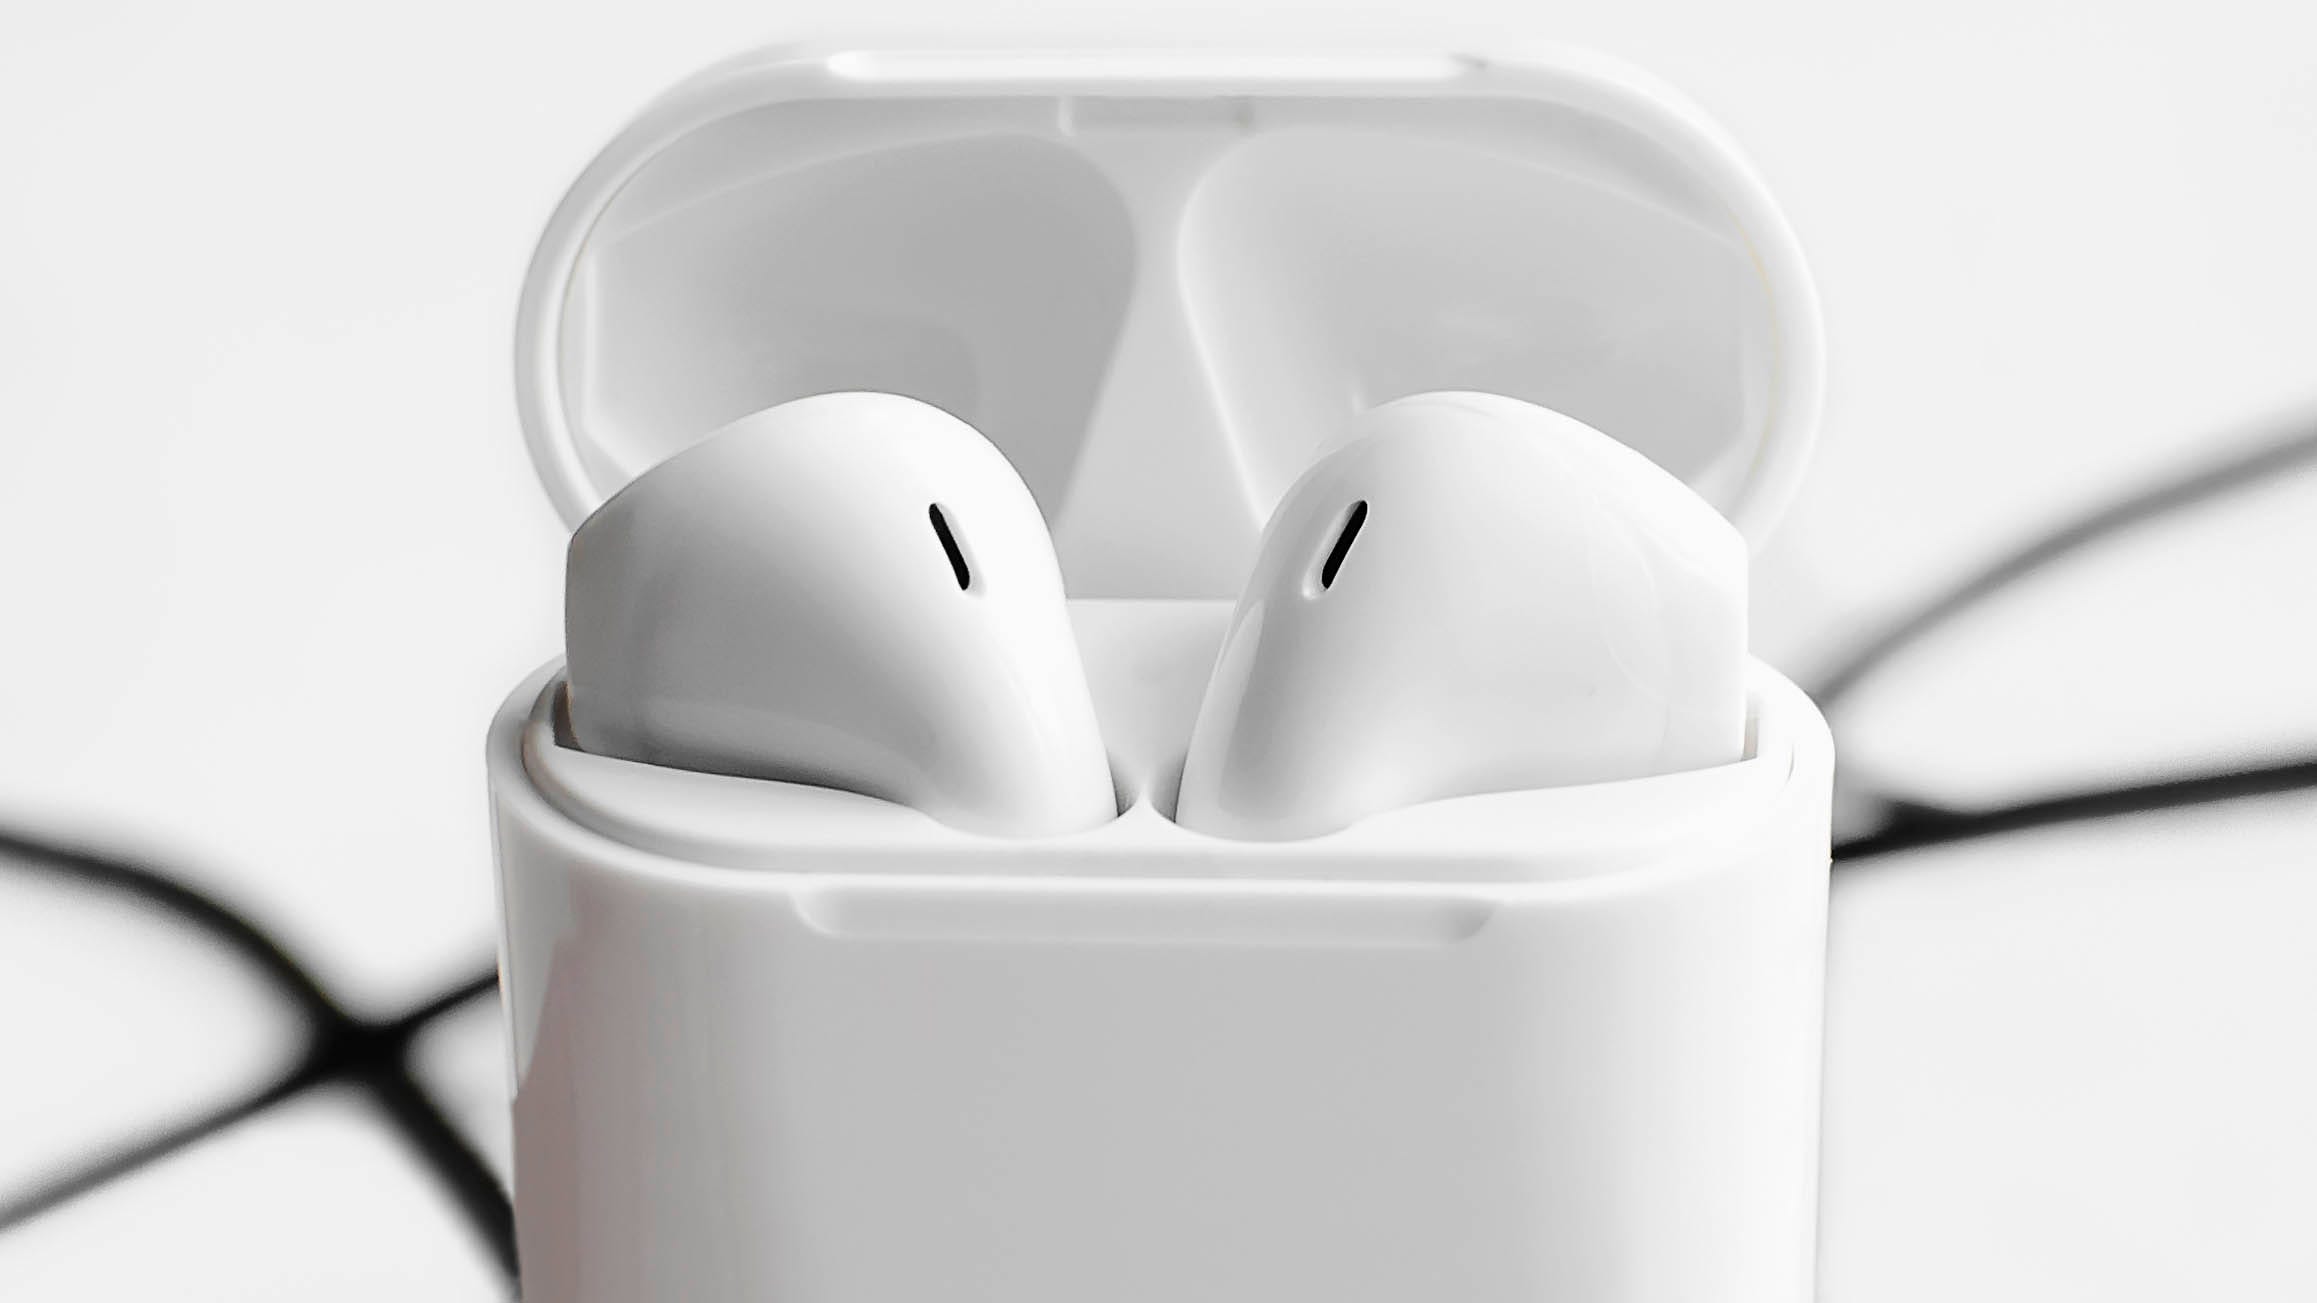 Apple AirPods lawsuit settled just before patent trial